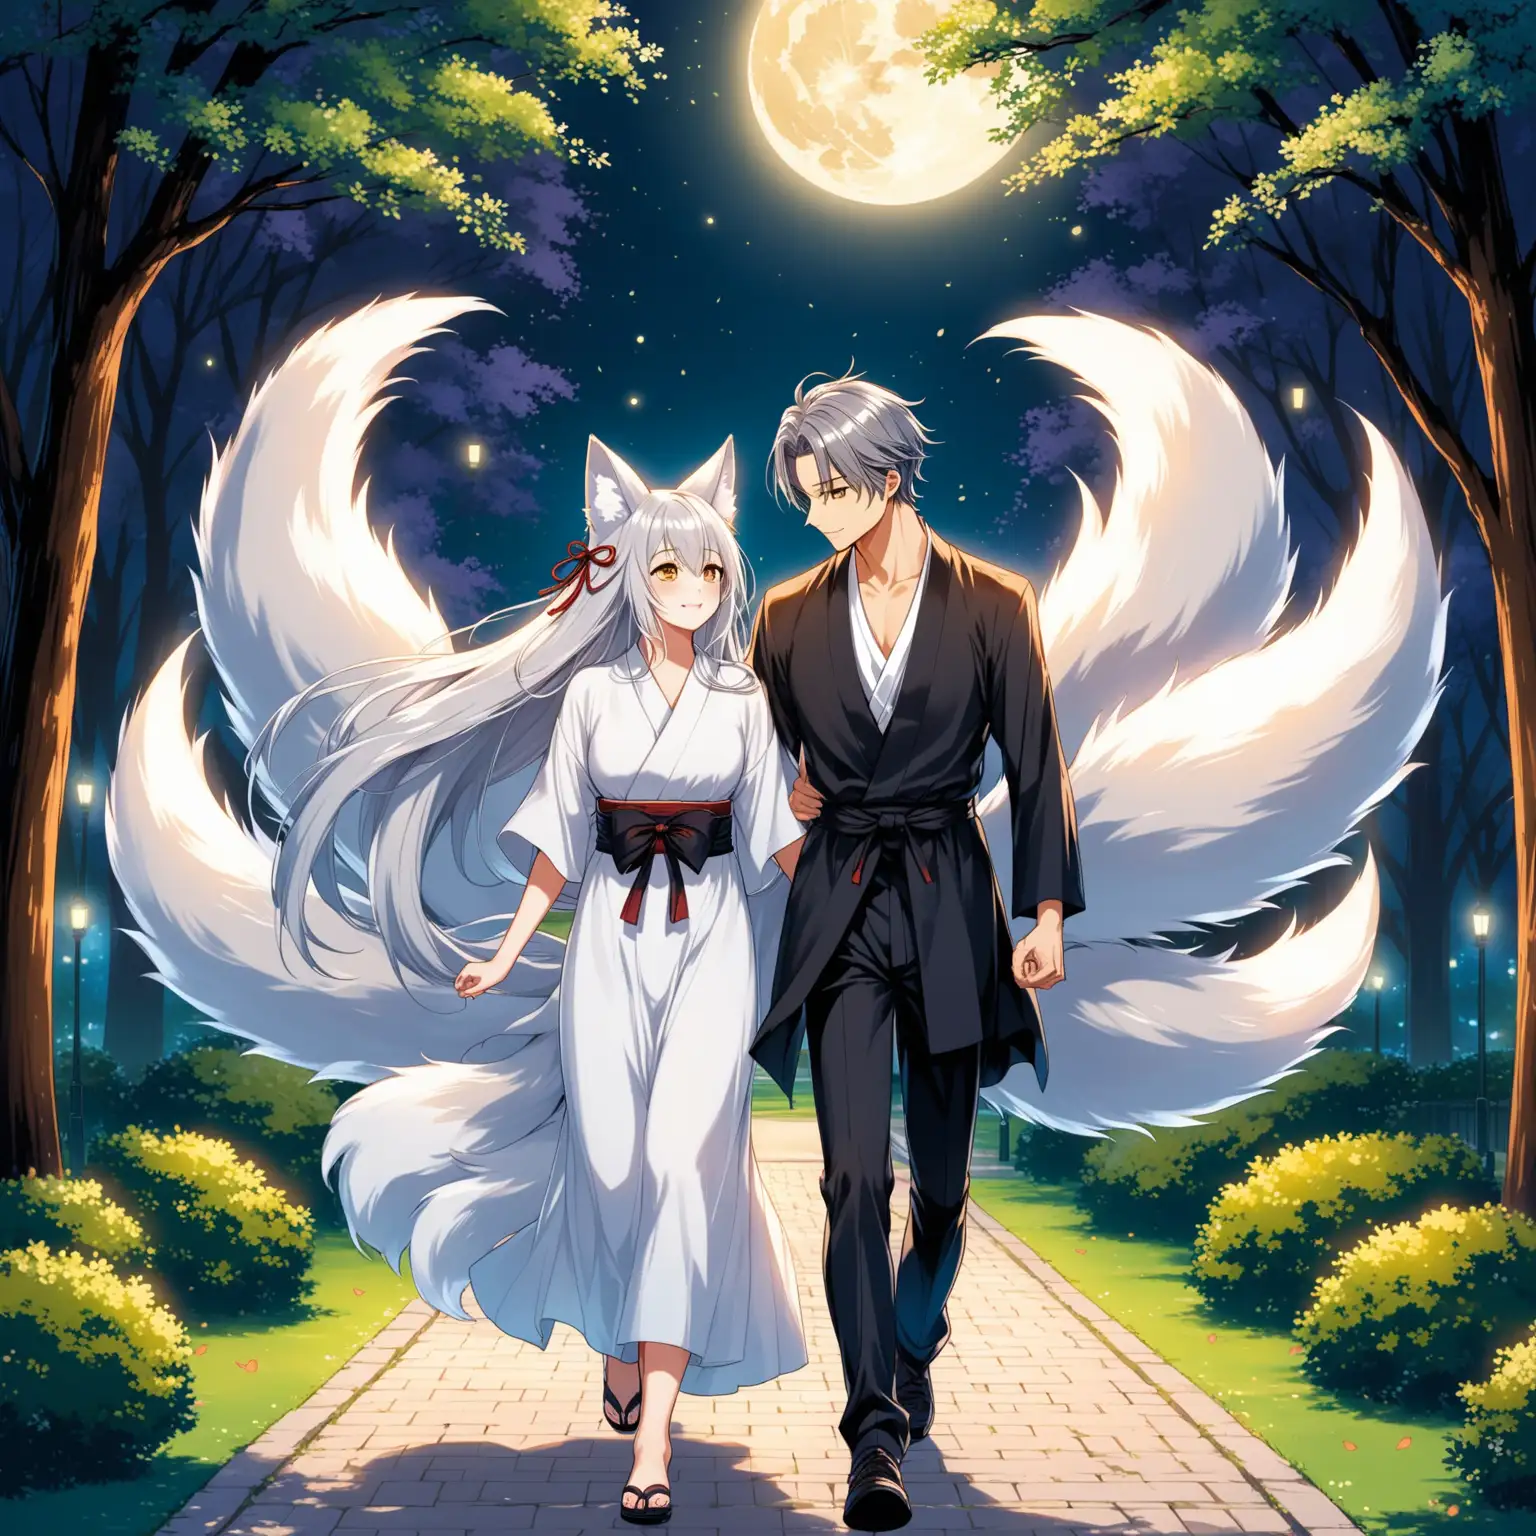 A beautiful kitsune with 9 tails, and a love-struck grey-haired young man, walking in a park in the moonlight